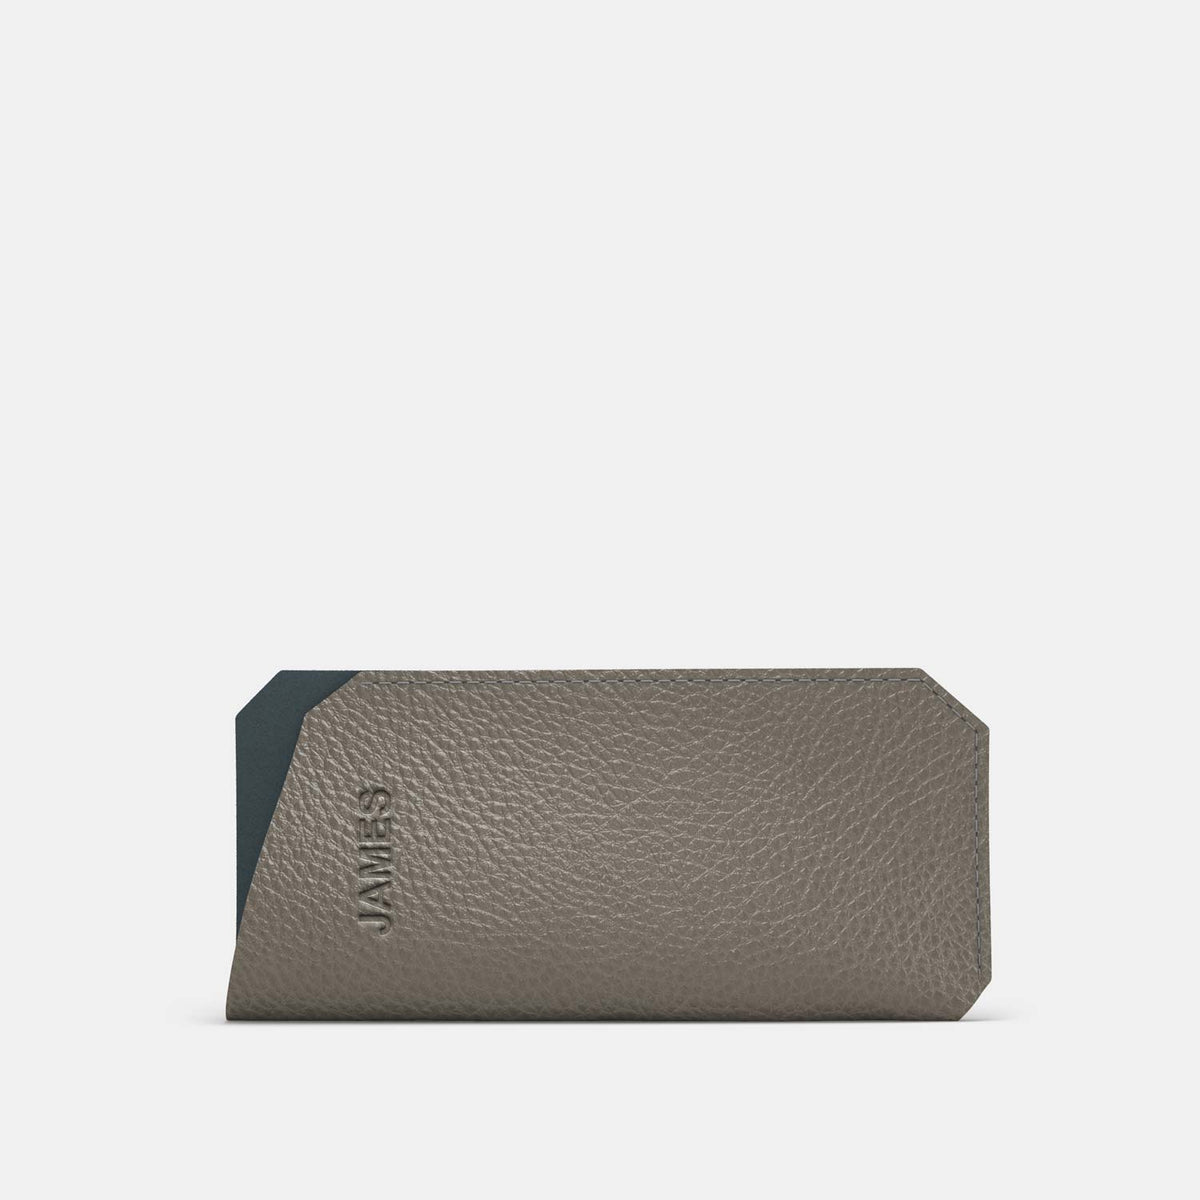 Leather Sunglasses Case - Grey and Grey - RYAN London